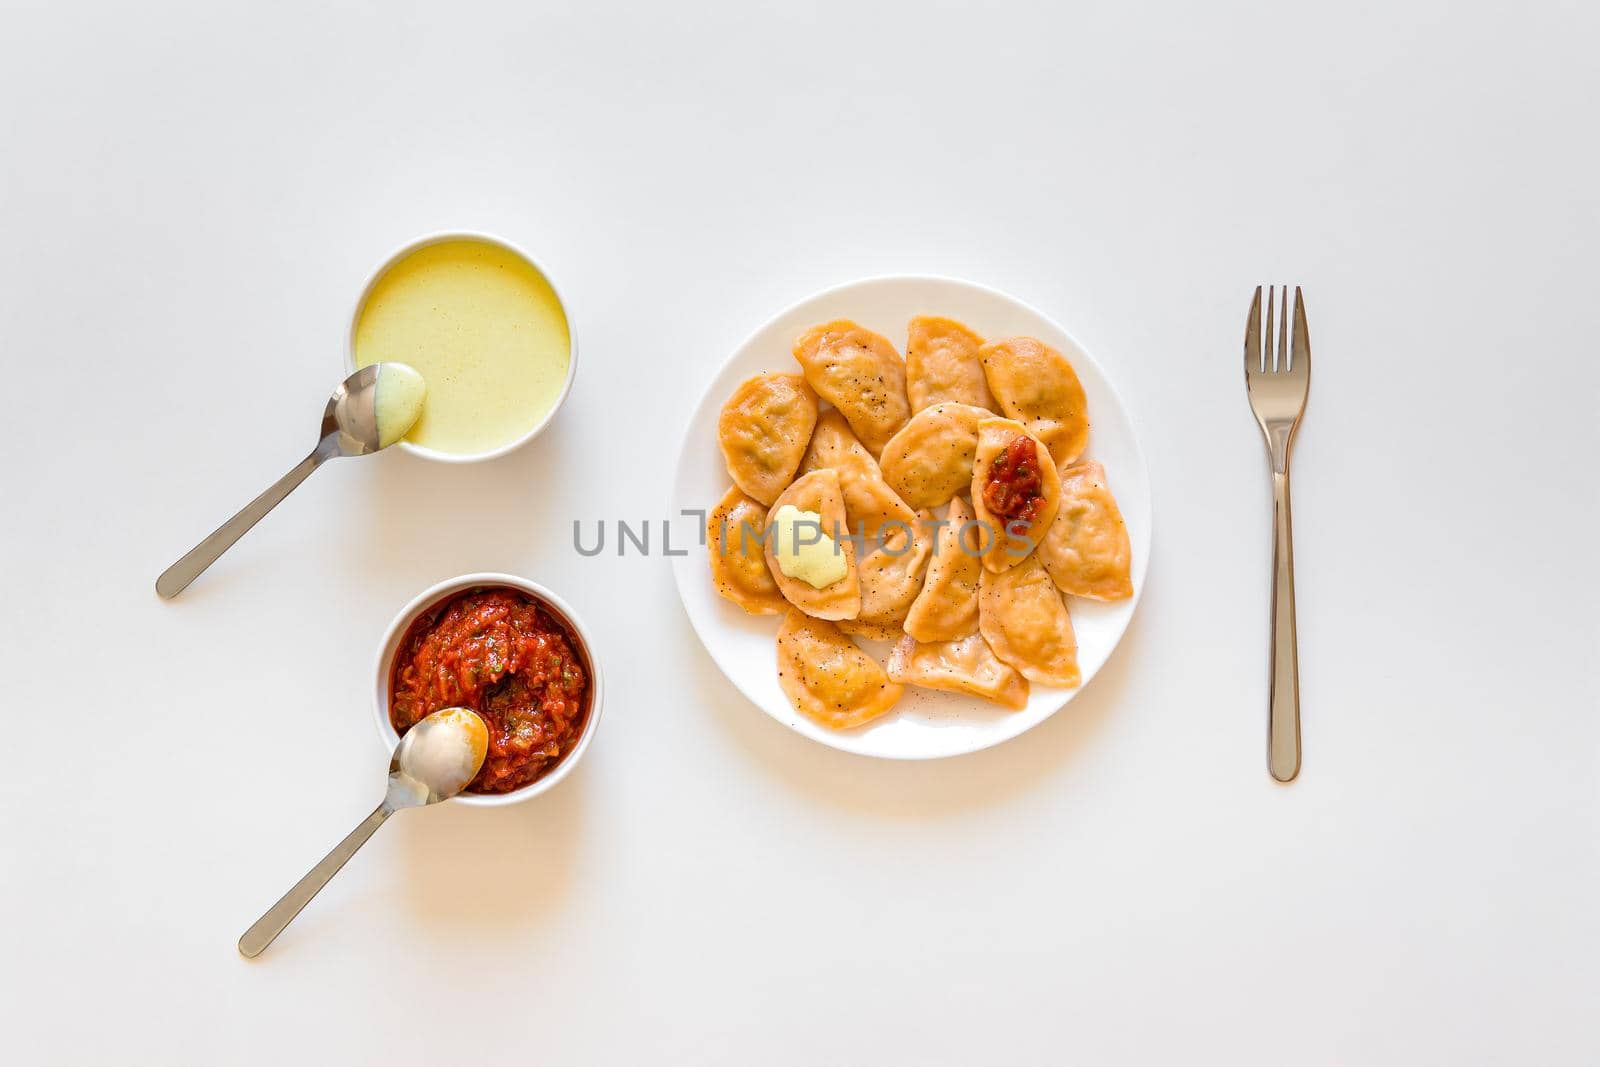 Traditional russian and ukrainian food vareniki dumplings with mustard and tomato sauce. Dough made red with tomato paste. Placed on white table. Top view.